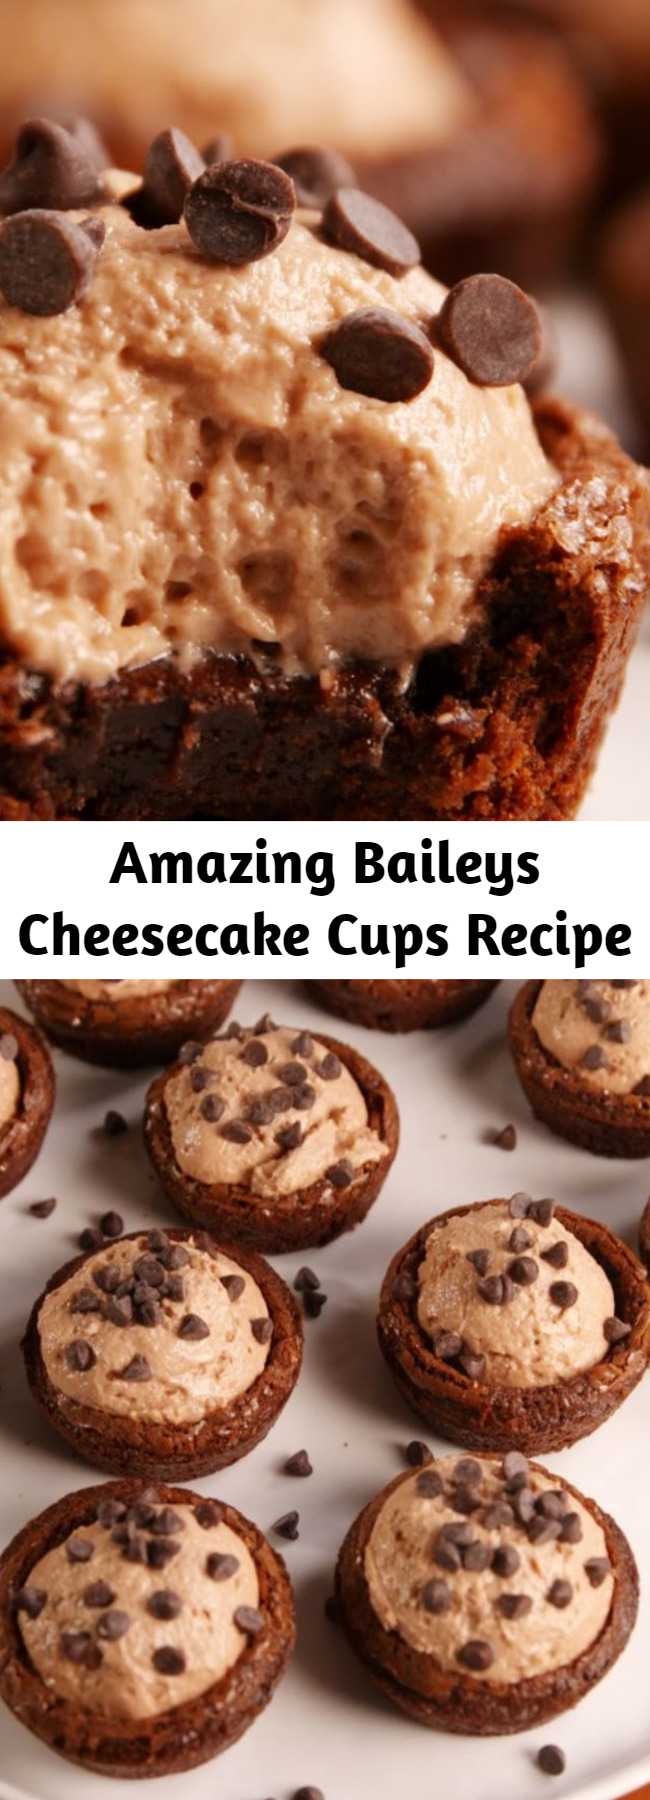 Amazing Baileys Cheesecake Cups Recipe - These brownie cups have got the most amazing, creamy Bailey's filling. Brownies, cheesecake, and booze? Sign us up.